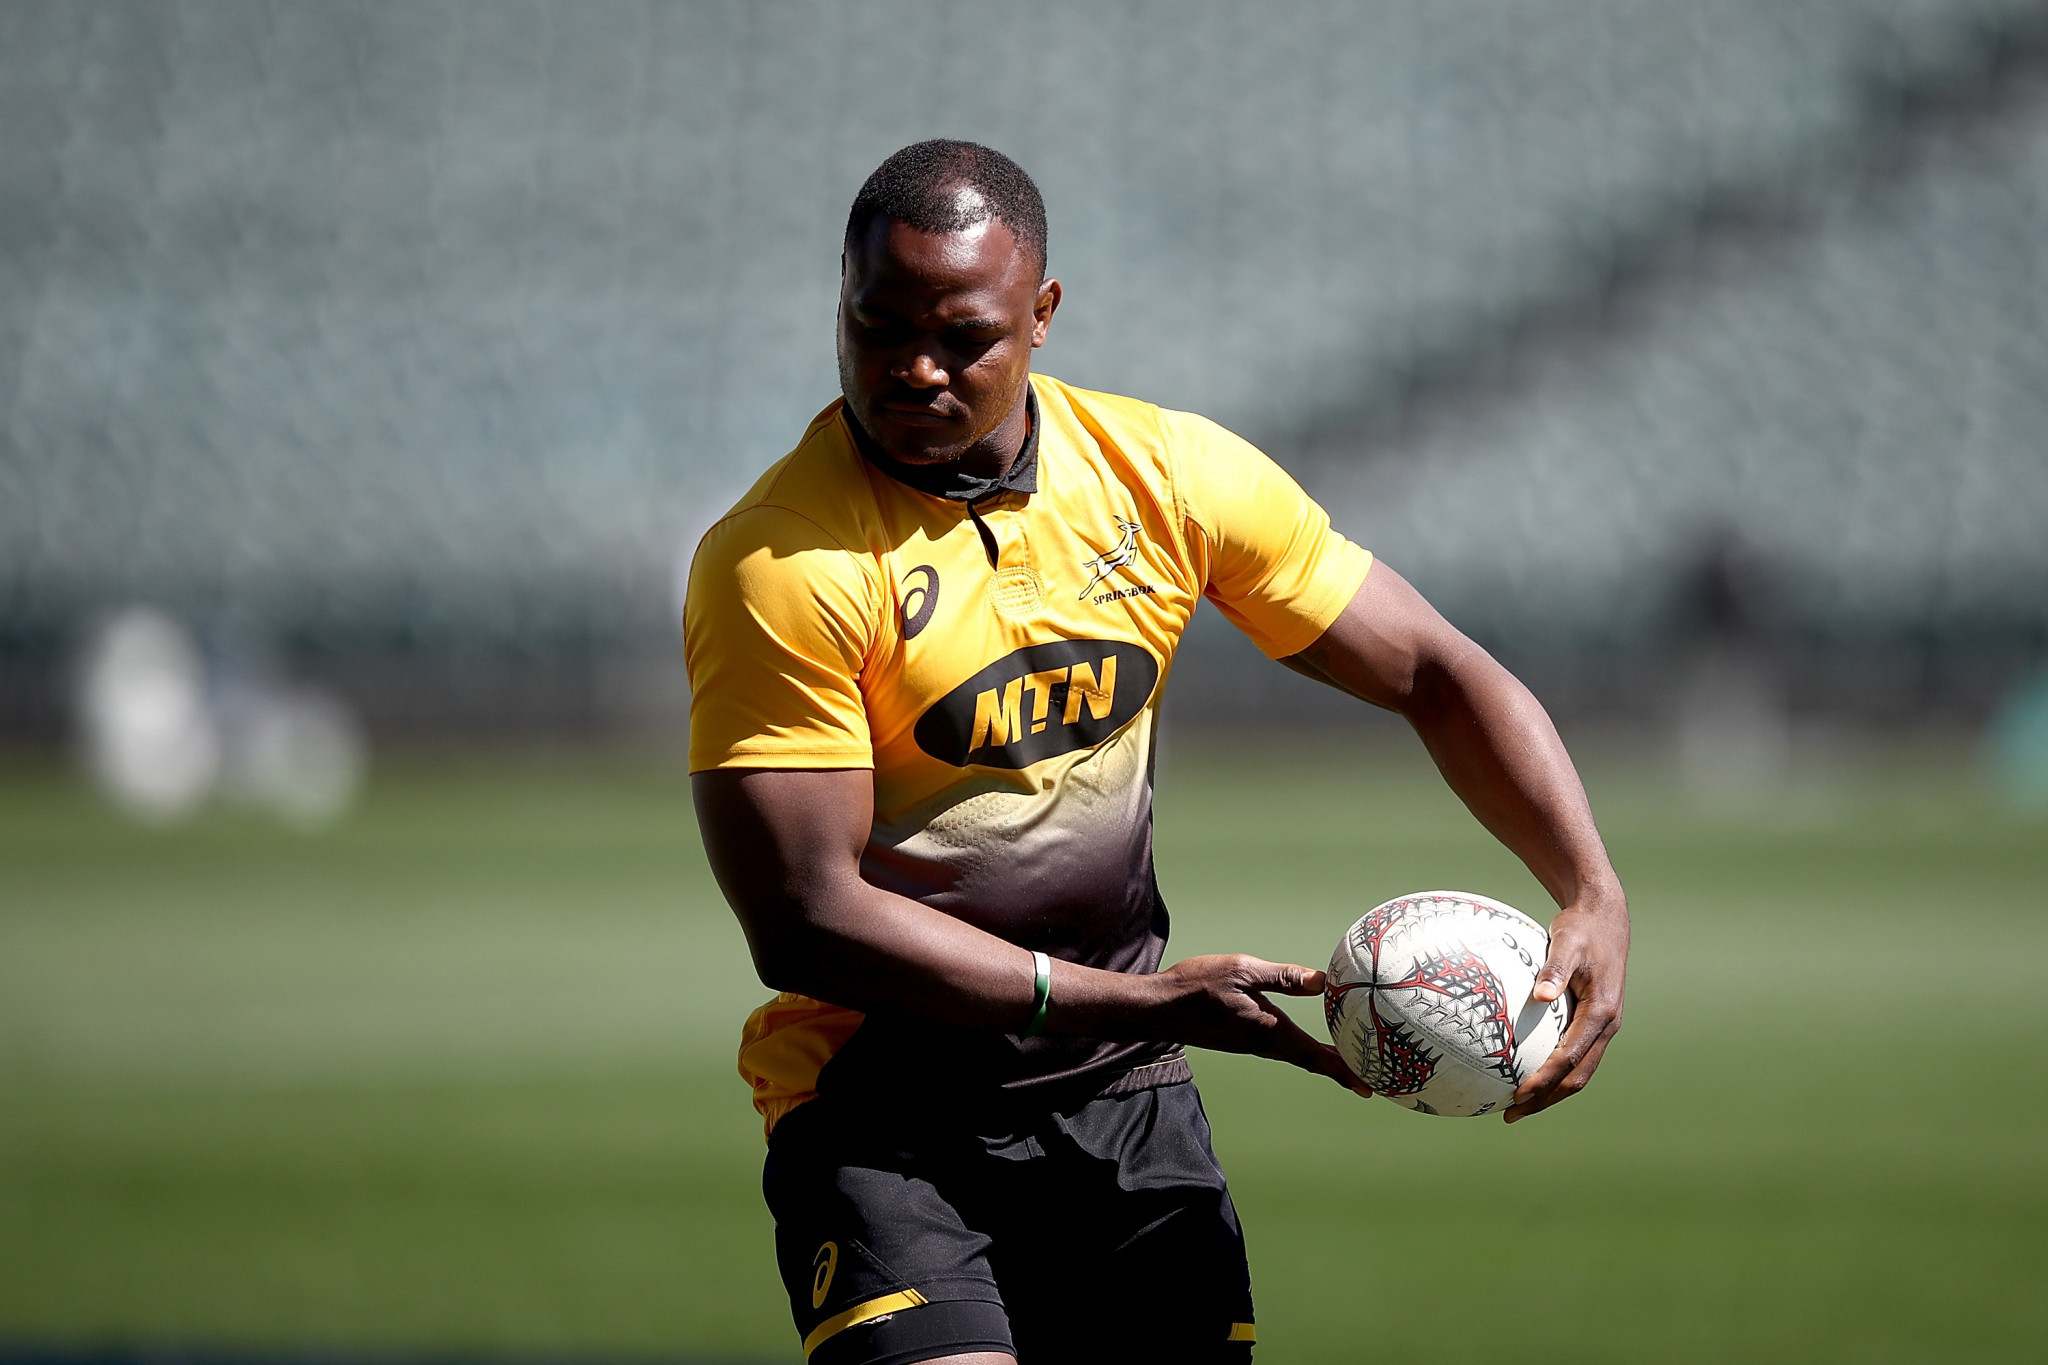 South African rugby player Ralepelle handed eight-year doping ban